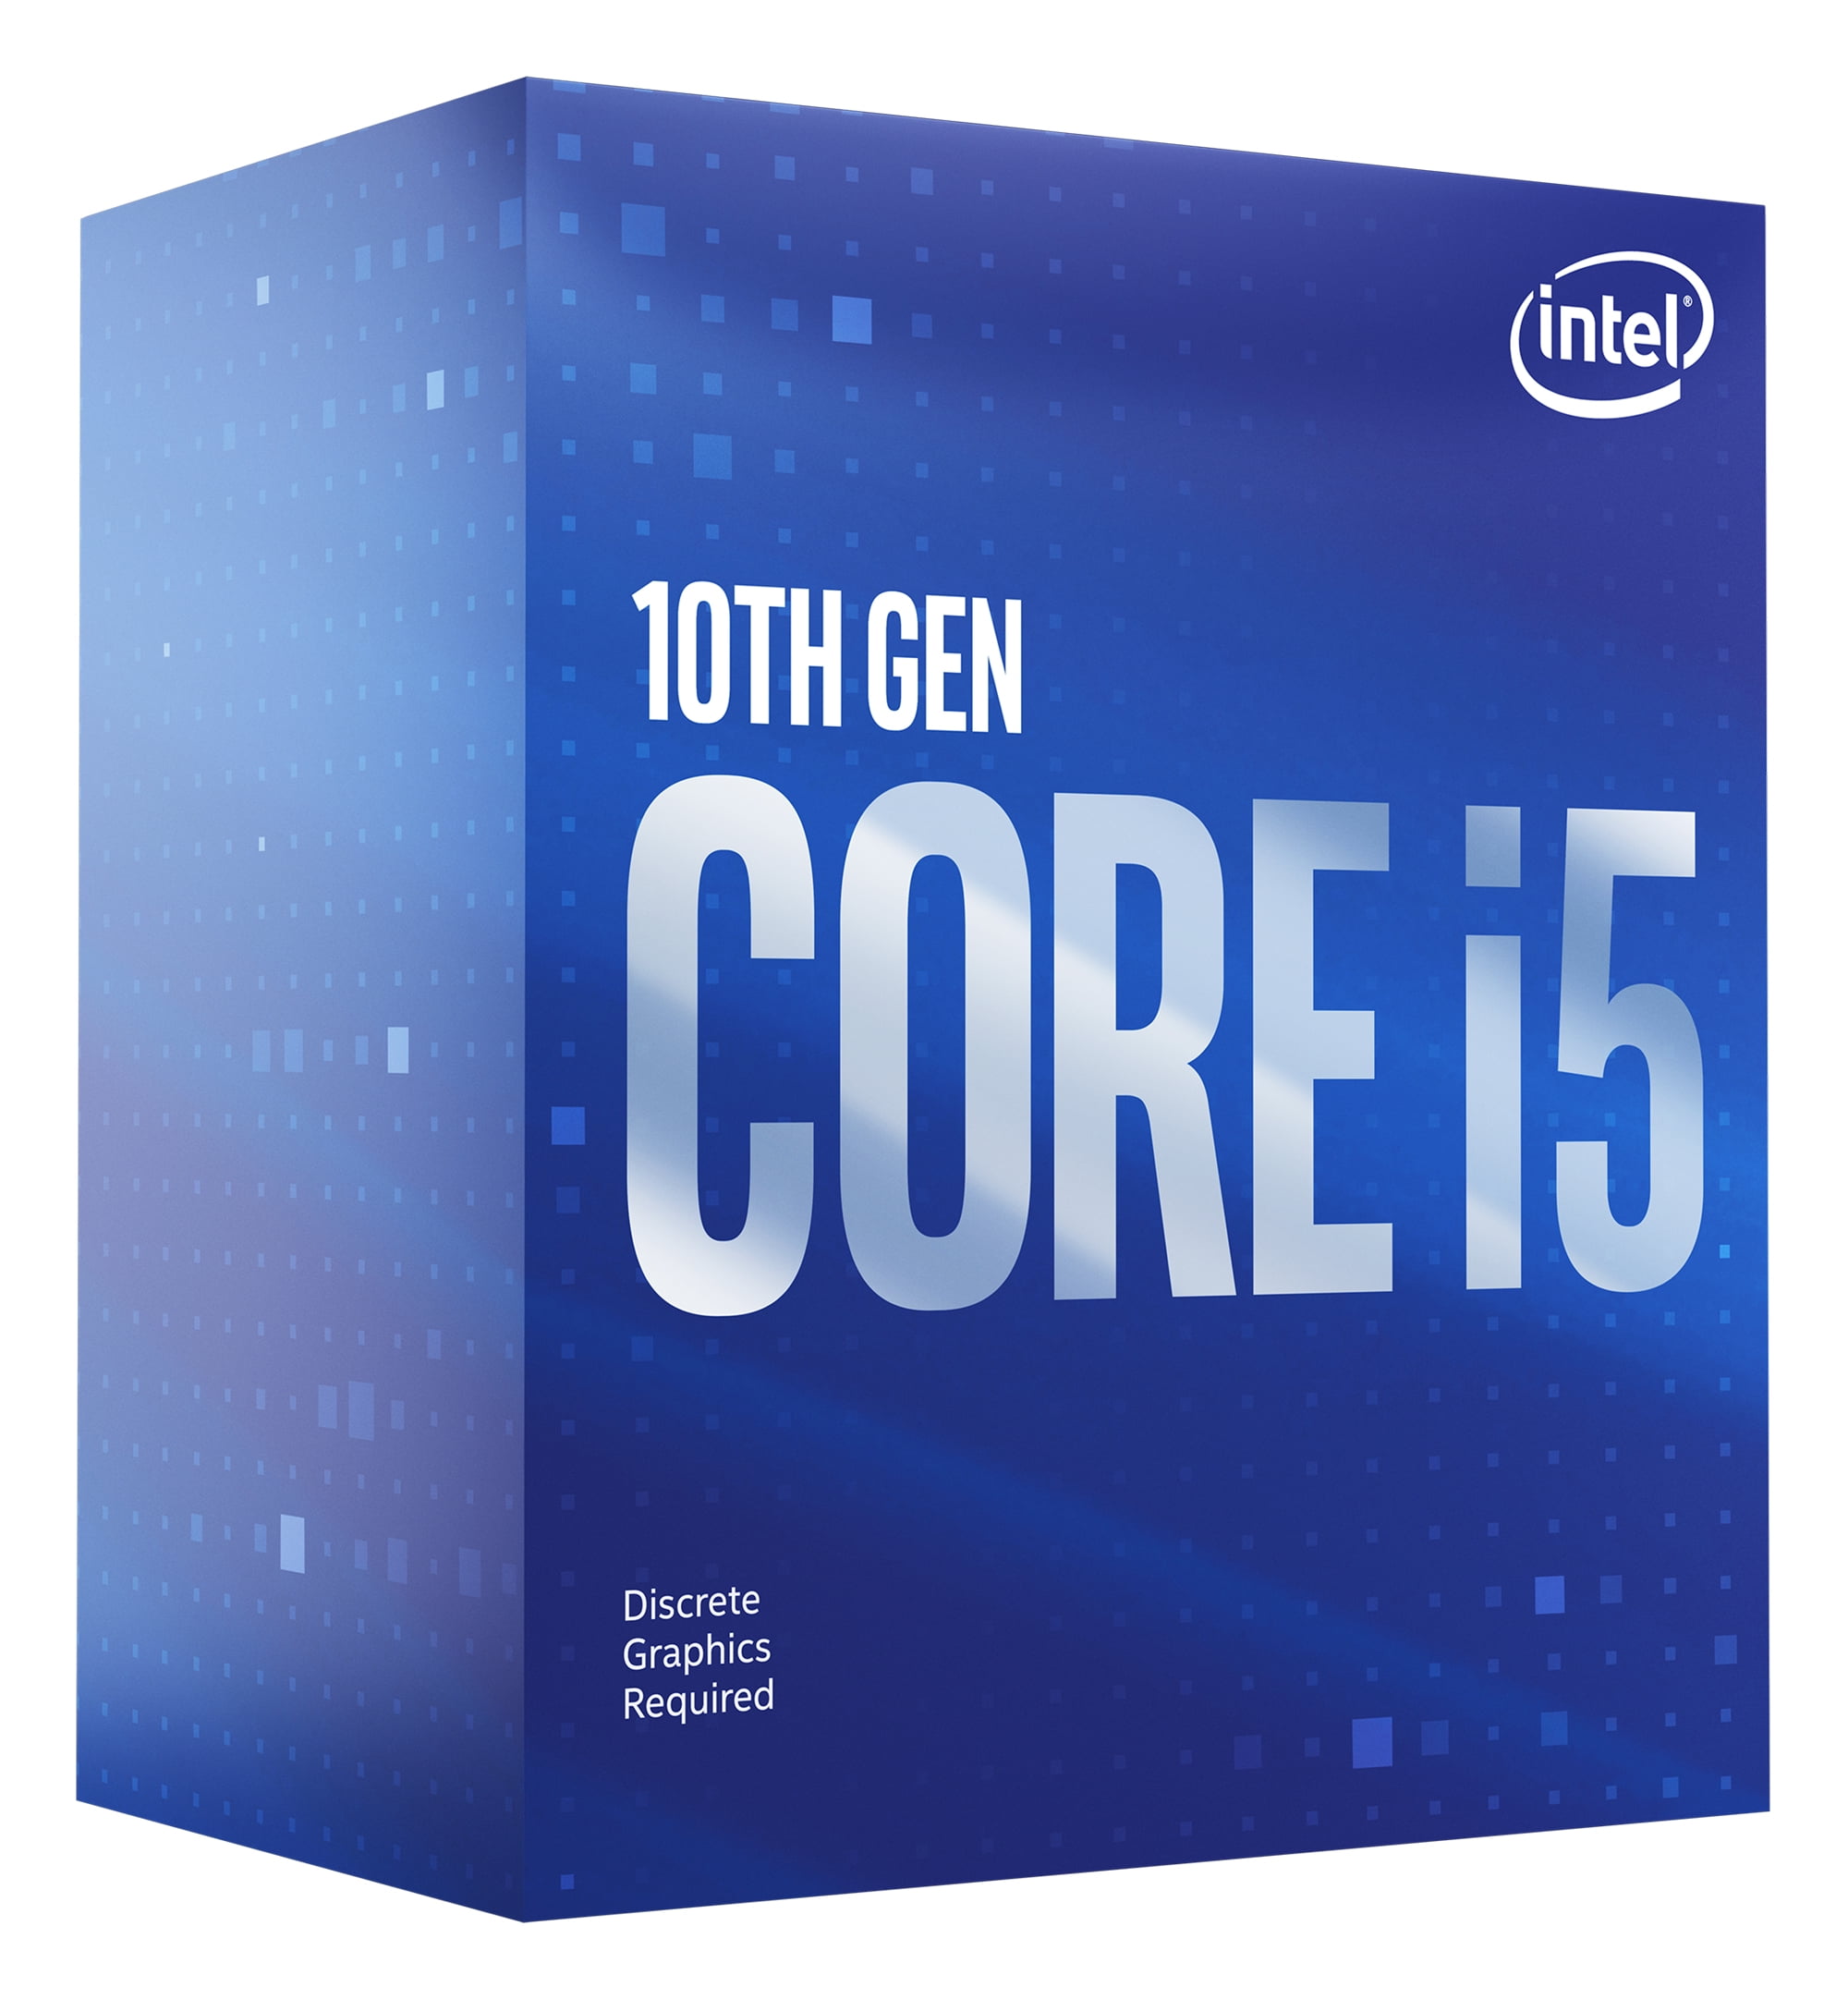 Intel Core i5-10400F Desktop Processor 6 Cores up to 4.3 GHz Without